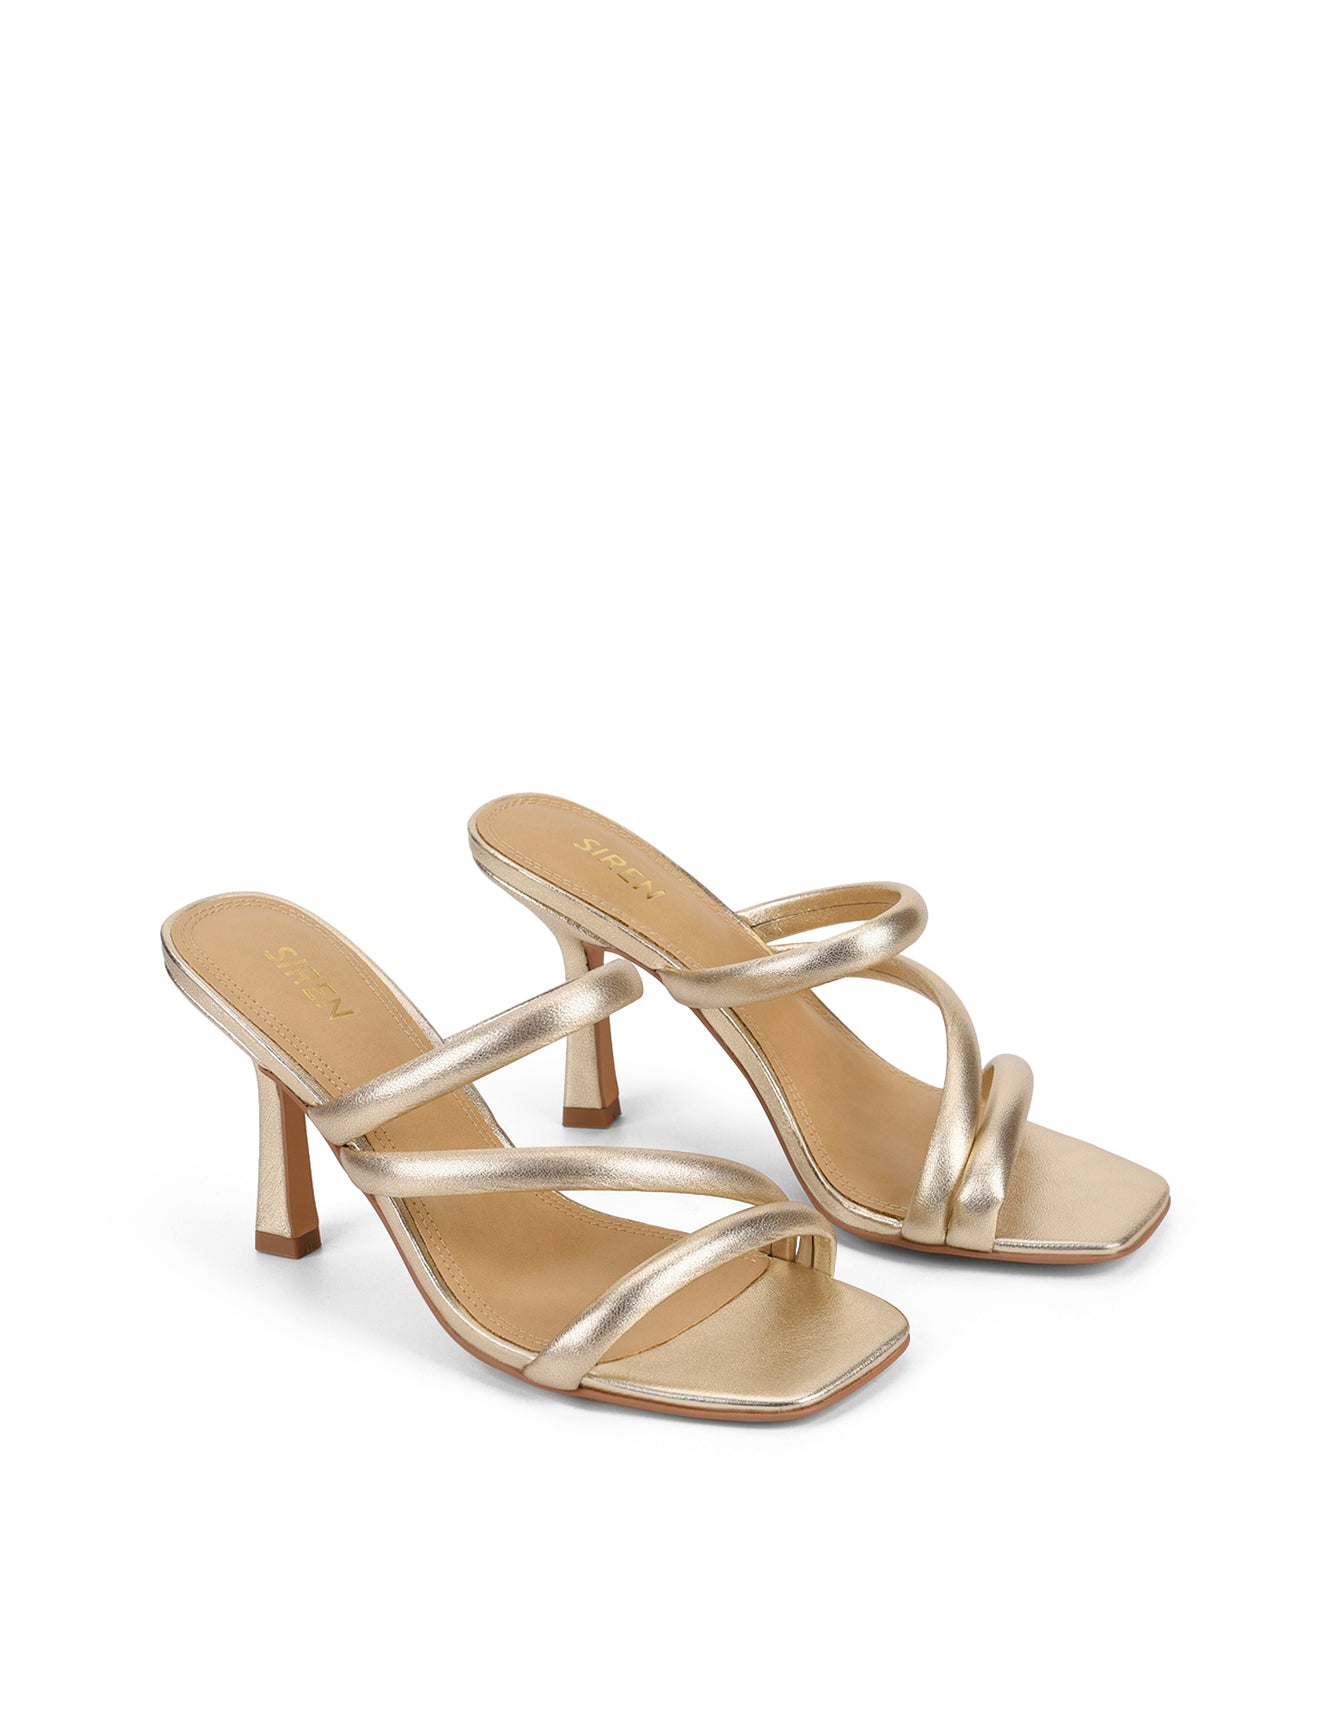 Spence Heeled Sandals - Gold Metallic Leather